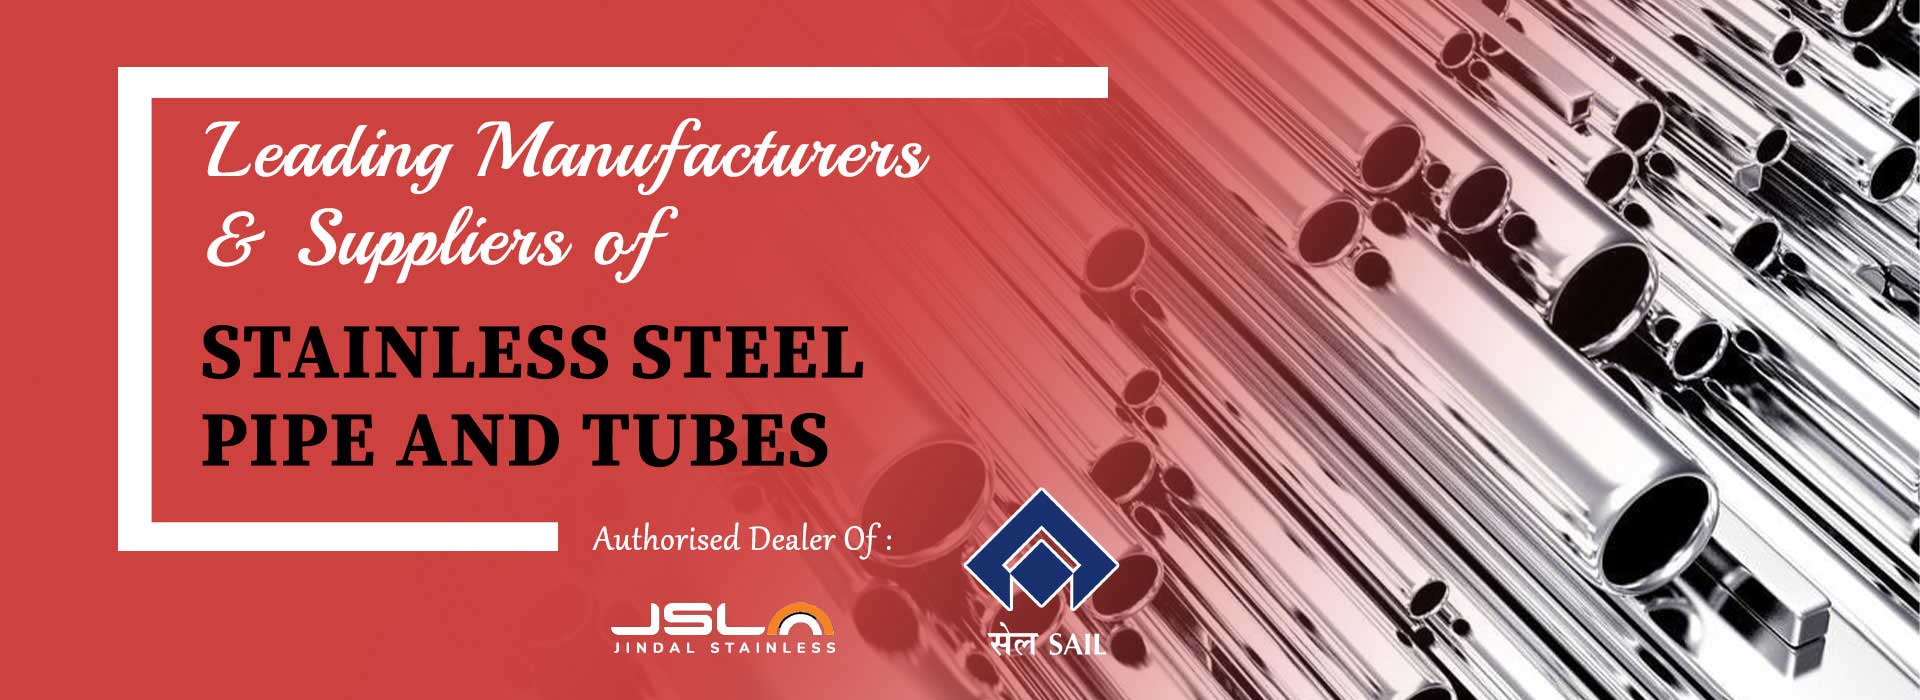 Stainless Steel Pipe and Tubes Manufacturers in Delhi